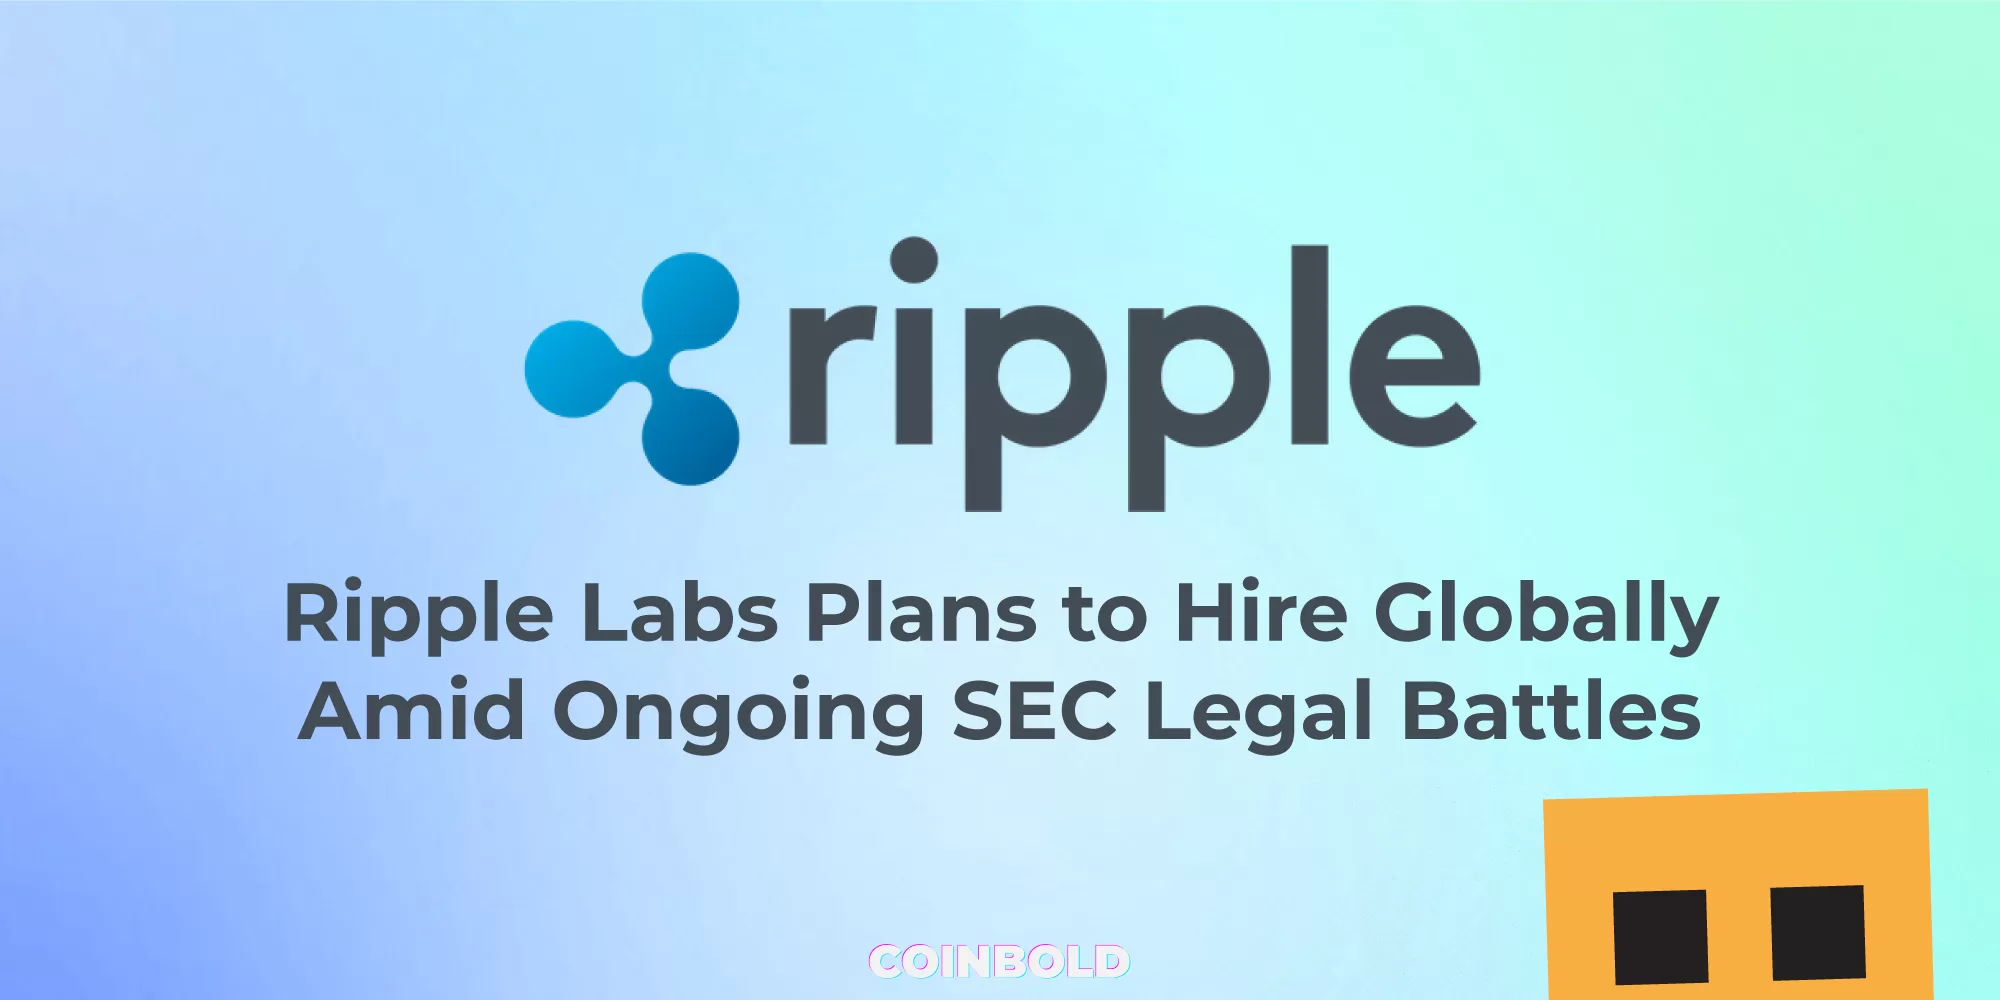 Ripple Labs Plans to Hire Globally Amid Ongoing SEC Legal Battles